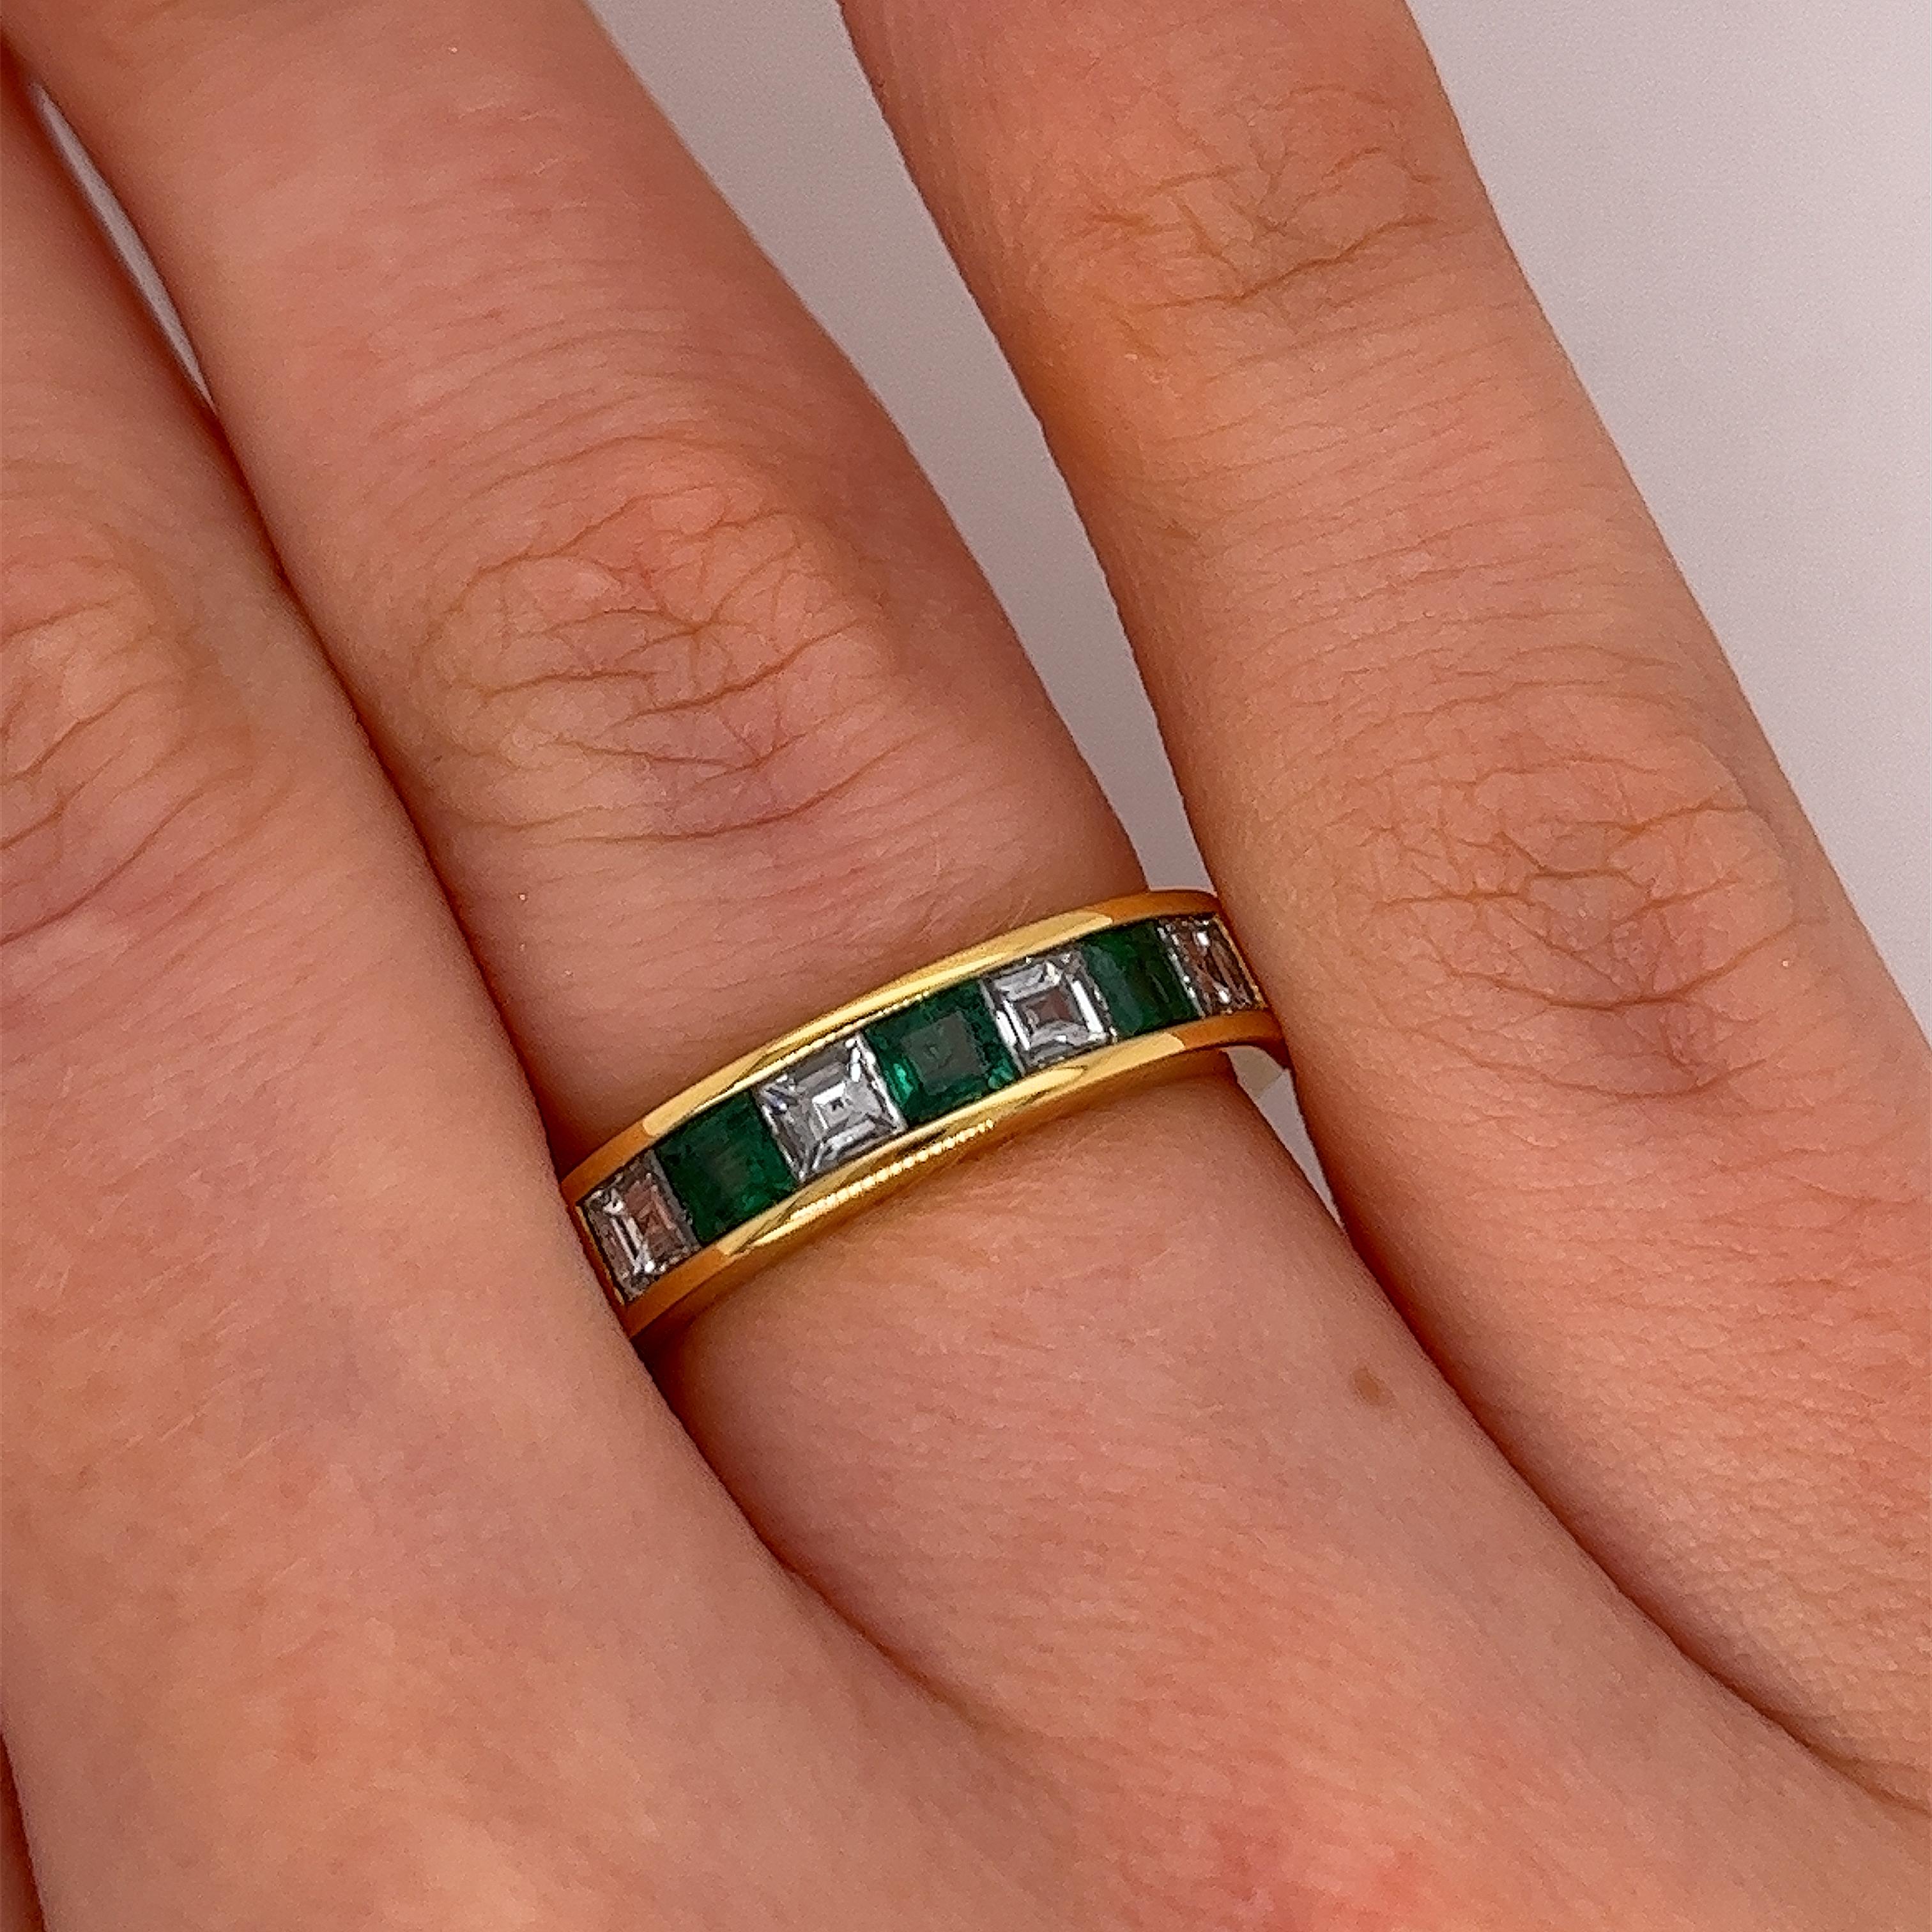 This diamond half eternity channel set band is set with 4 square diamonds and 3 square emeralds, 0.67ct princess cut diamonds and 0.52 emeralds set in 18ct yellow gold.
This ring is elegant and beautiful for a wedding ring or anniversary